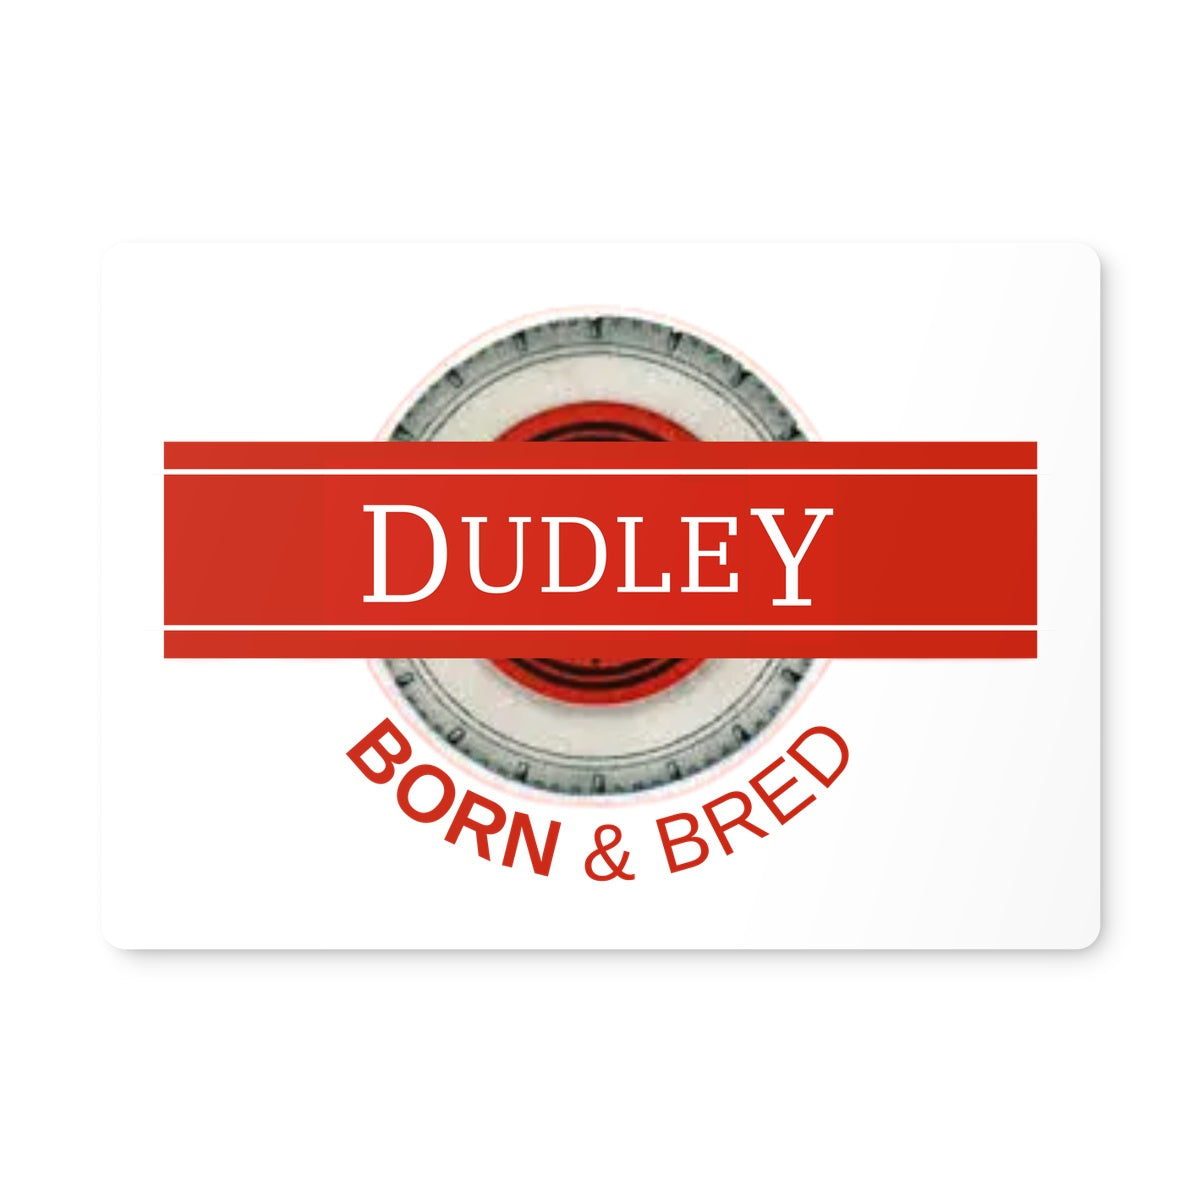 Dudley BORN & BRED Placemat